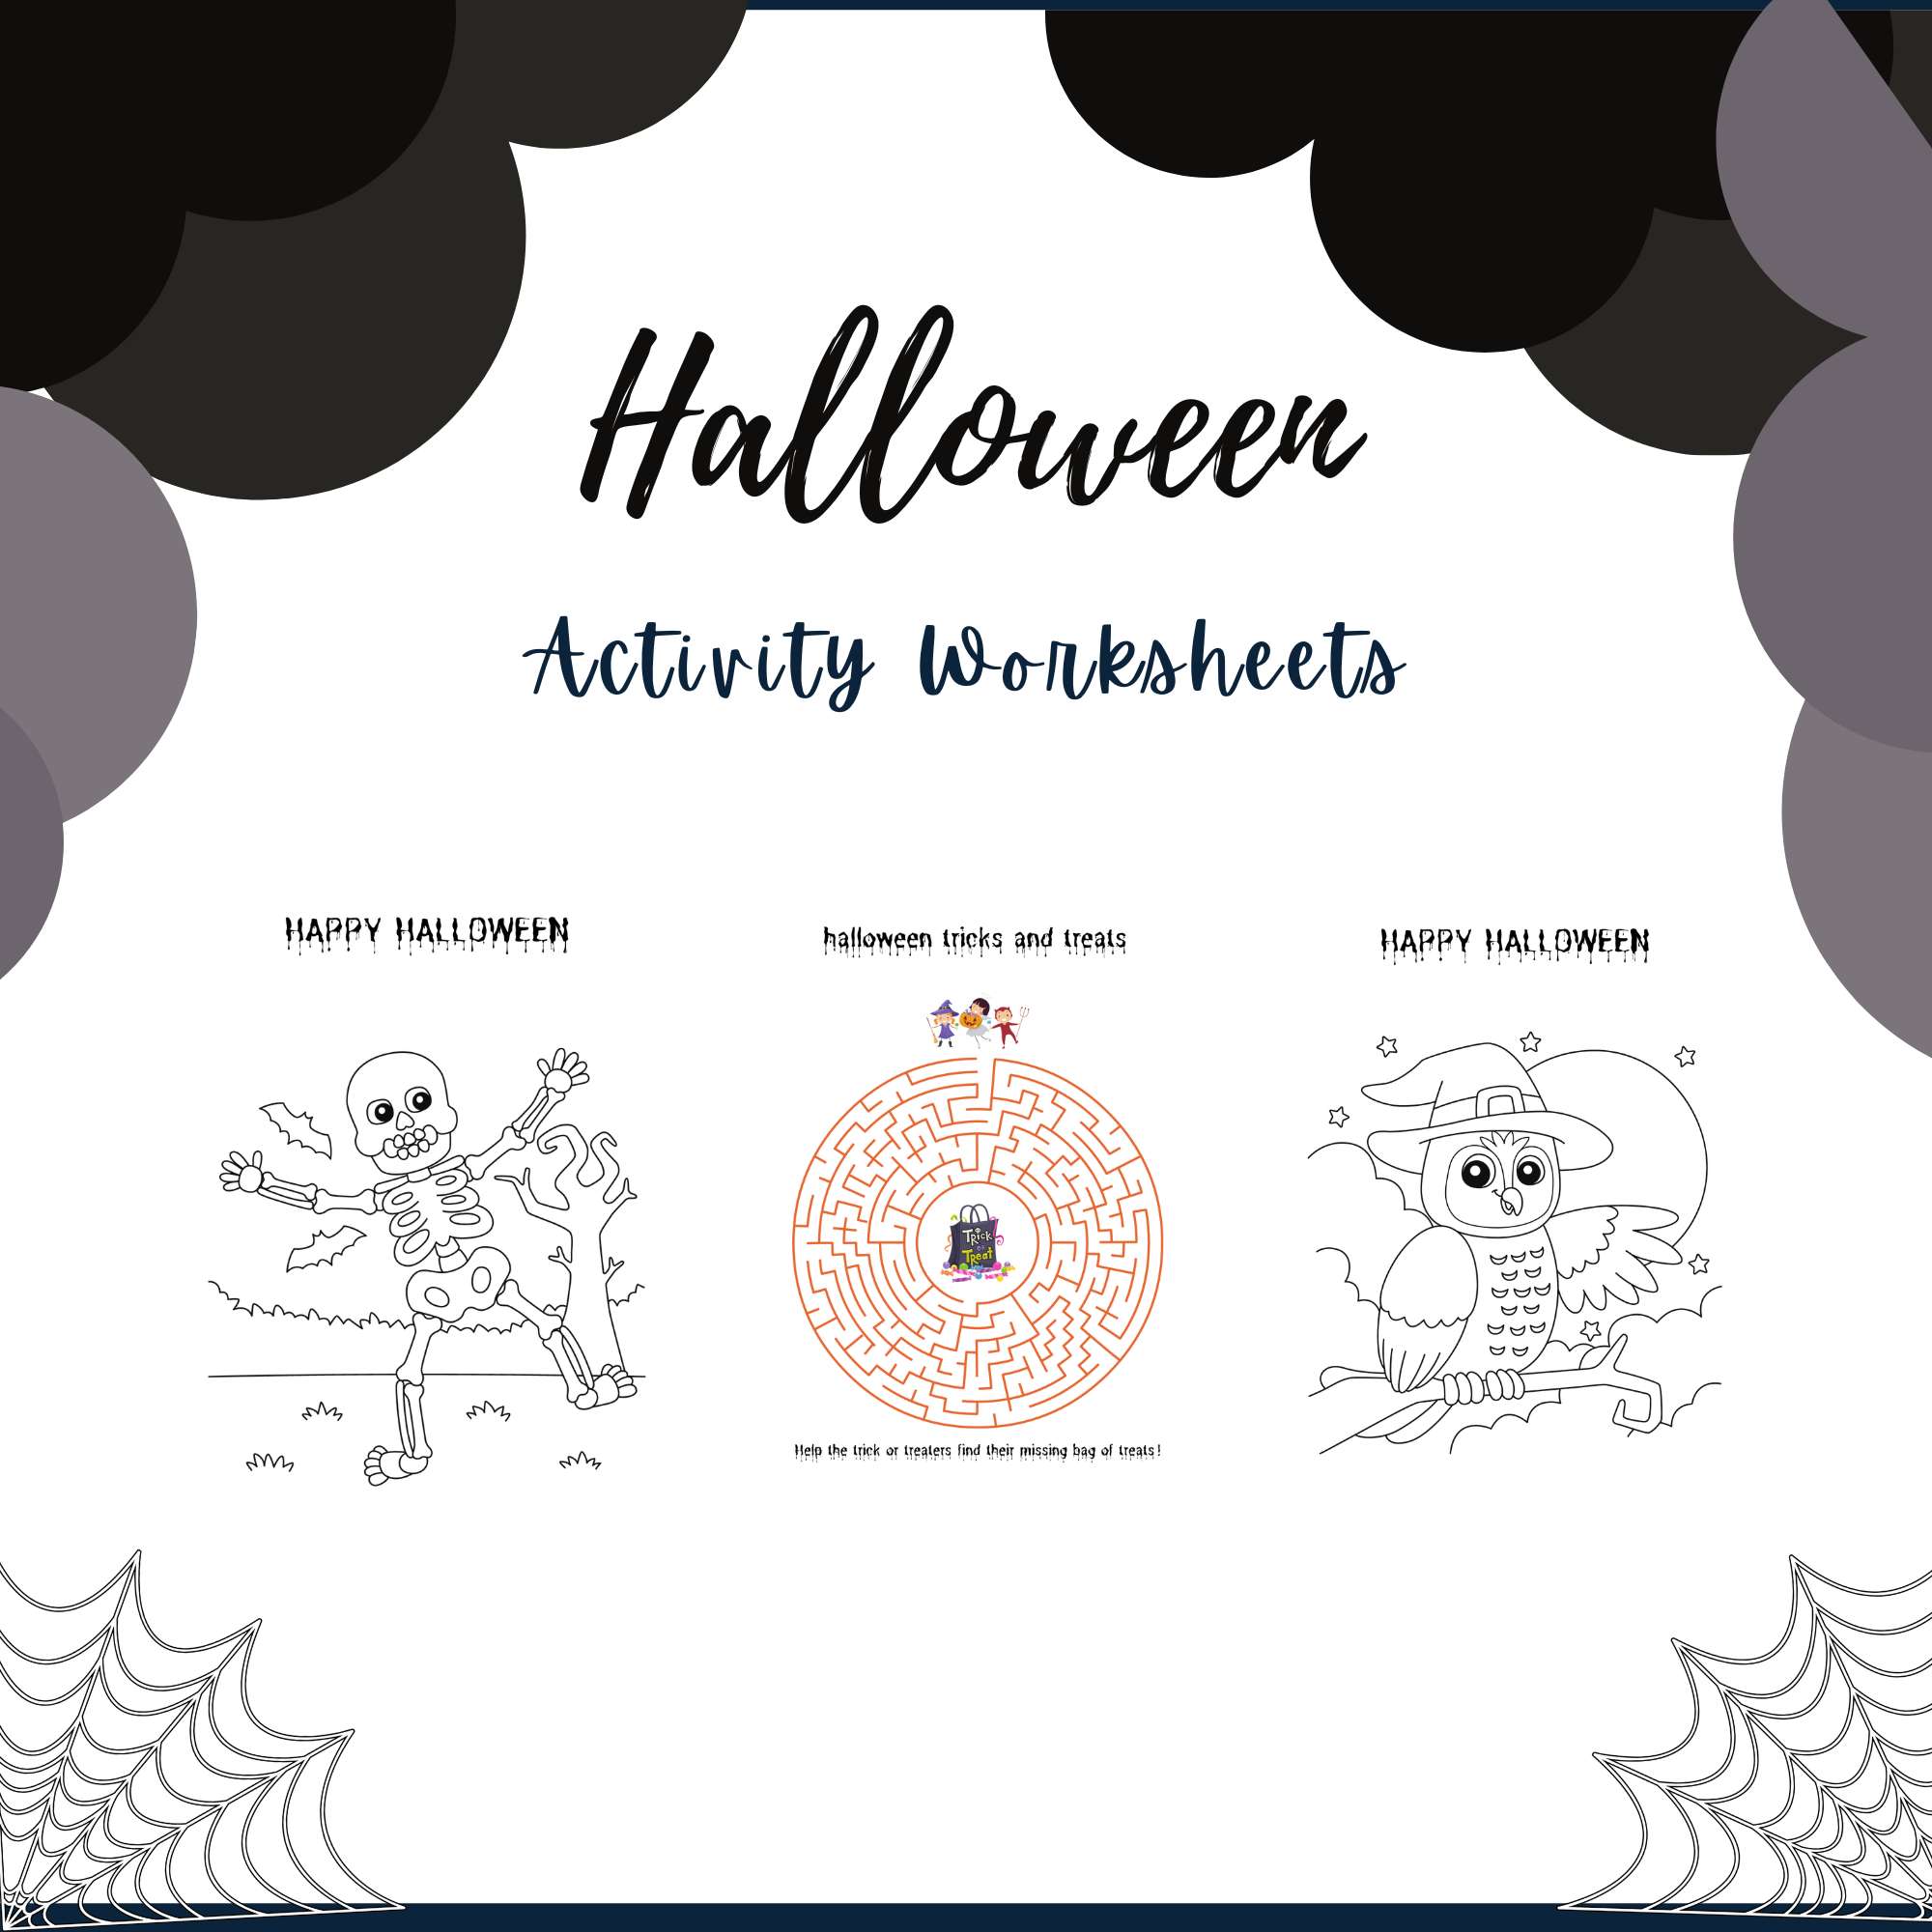 Halloween Fun Activity Worksheets, Games, Coloring Pages preview image.